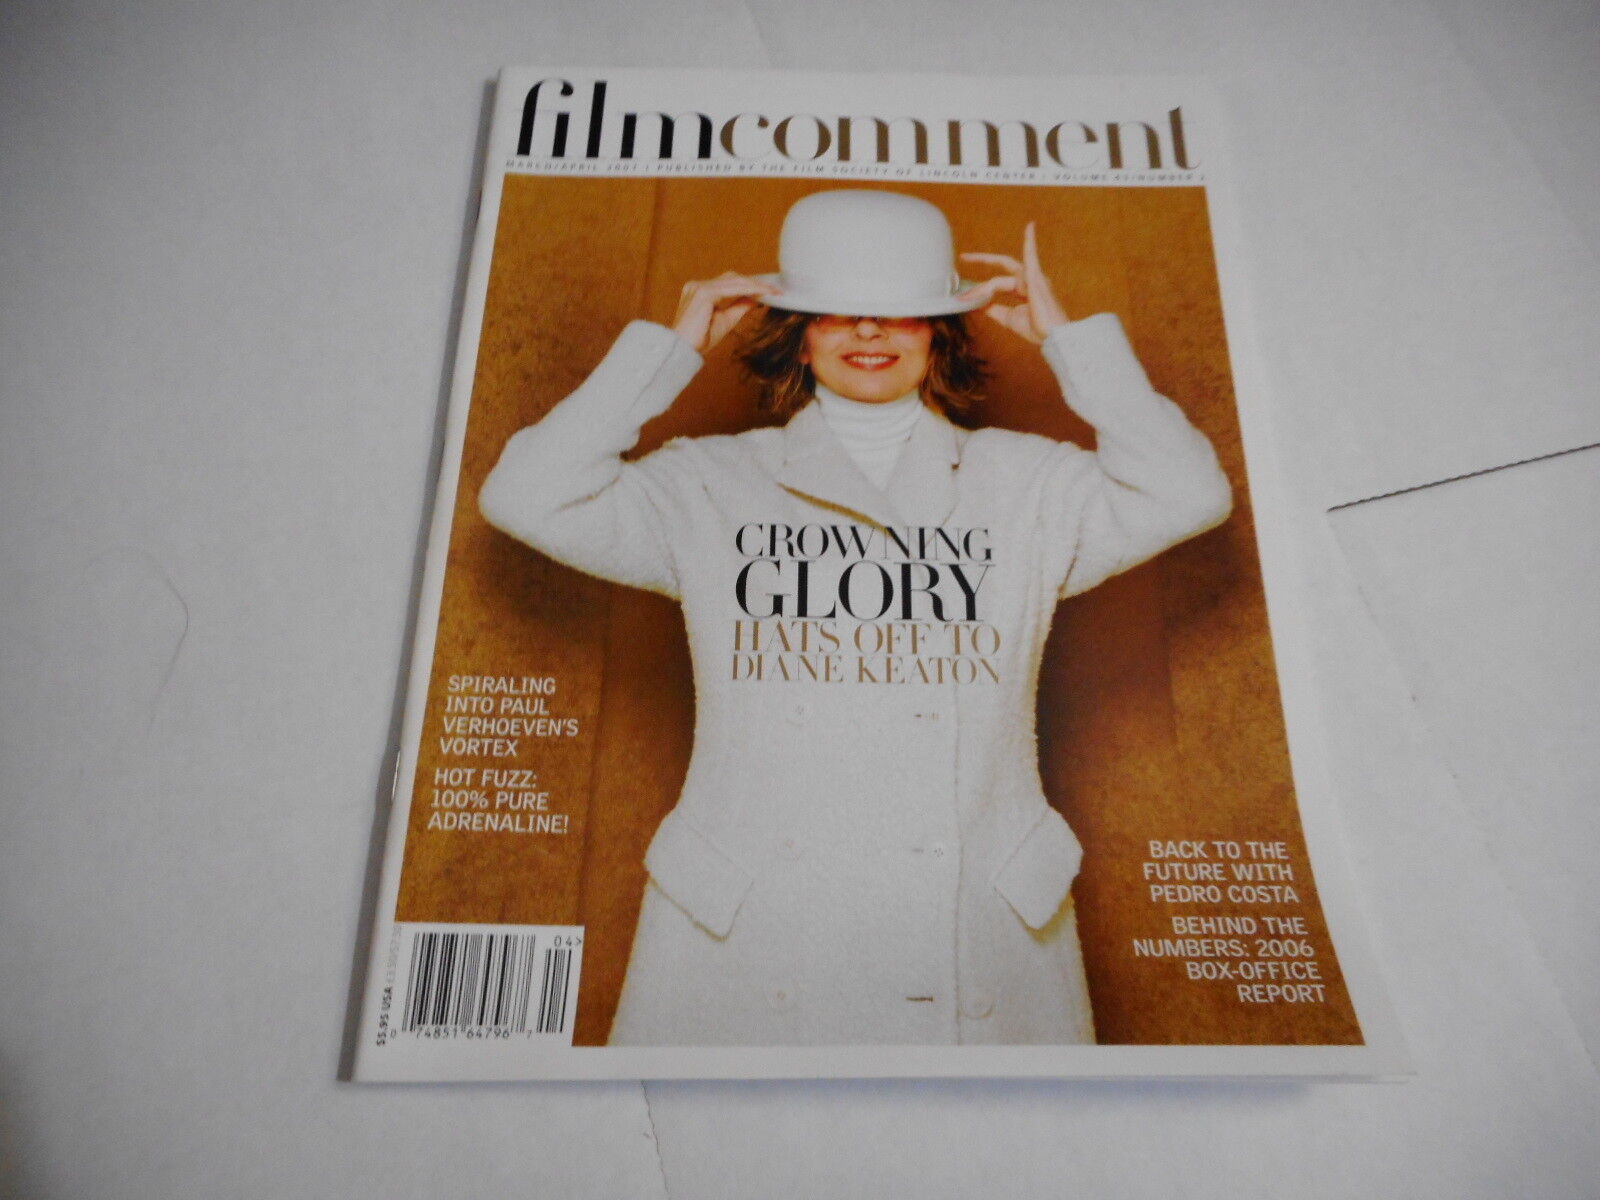 MARCH/APRIL 2007 FILM COMMENTS movie magazine CROWNING GLORY - DIANE KEATON